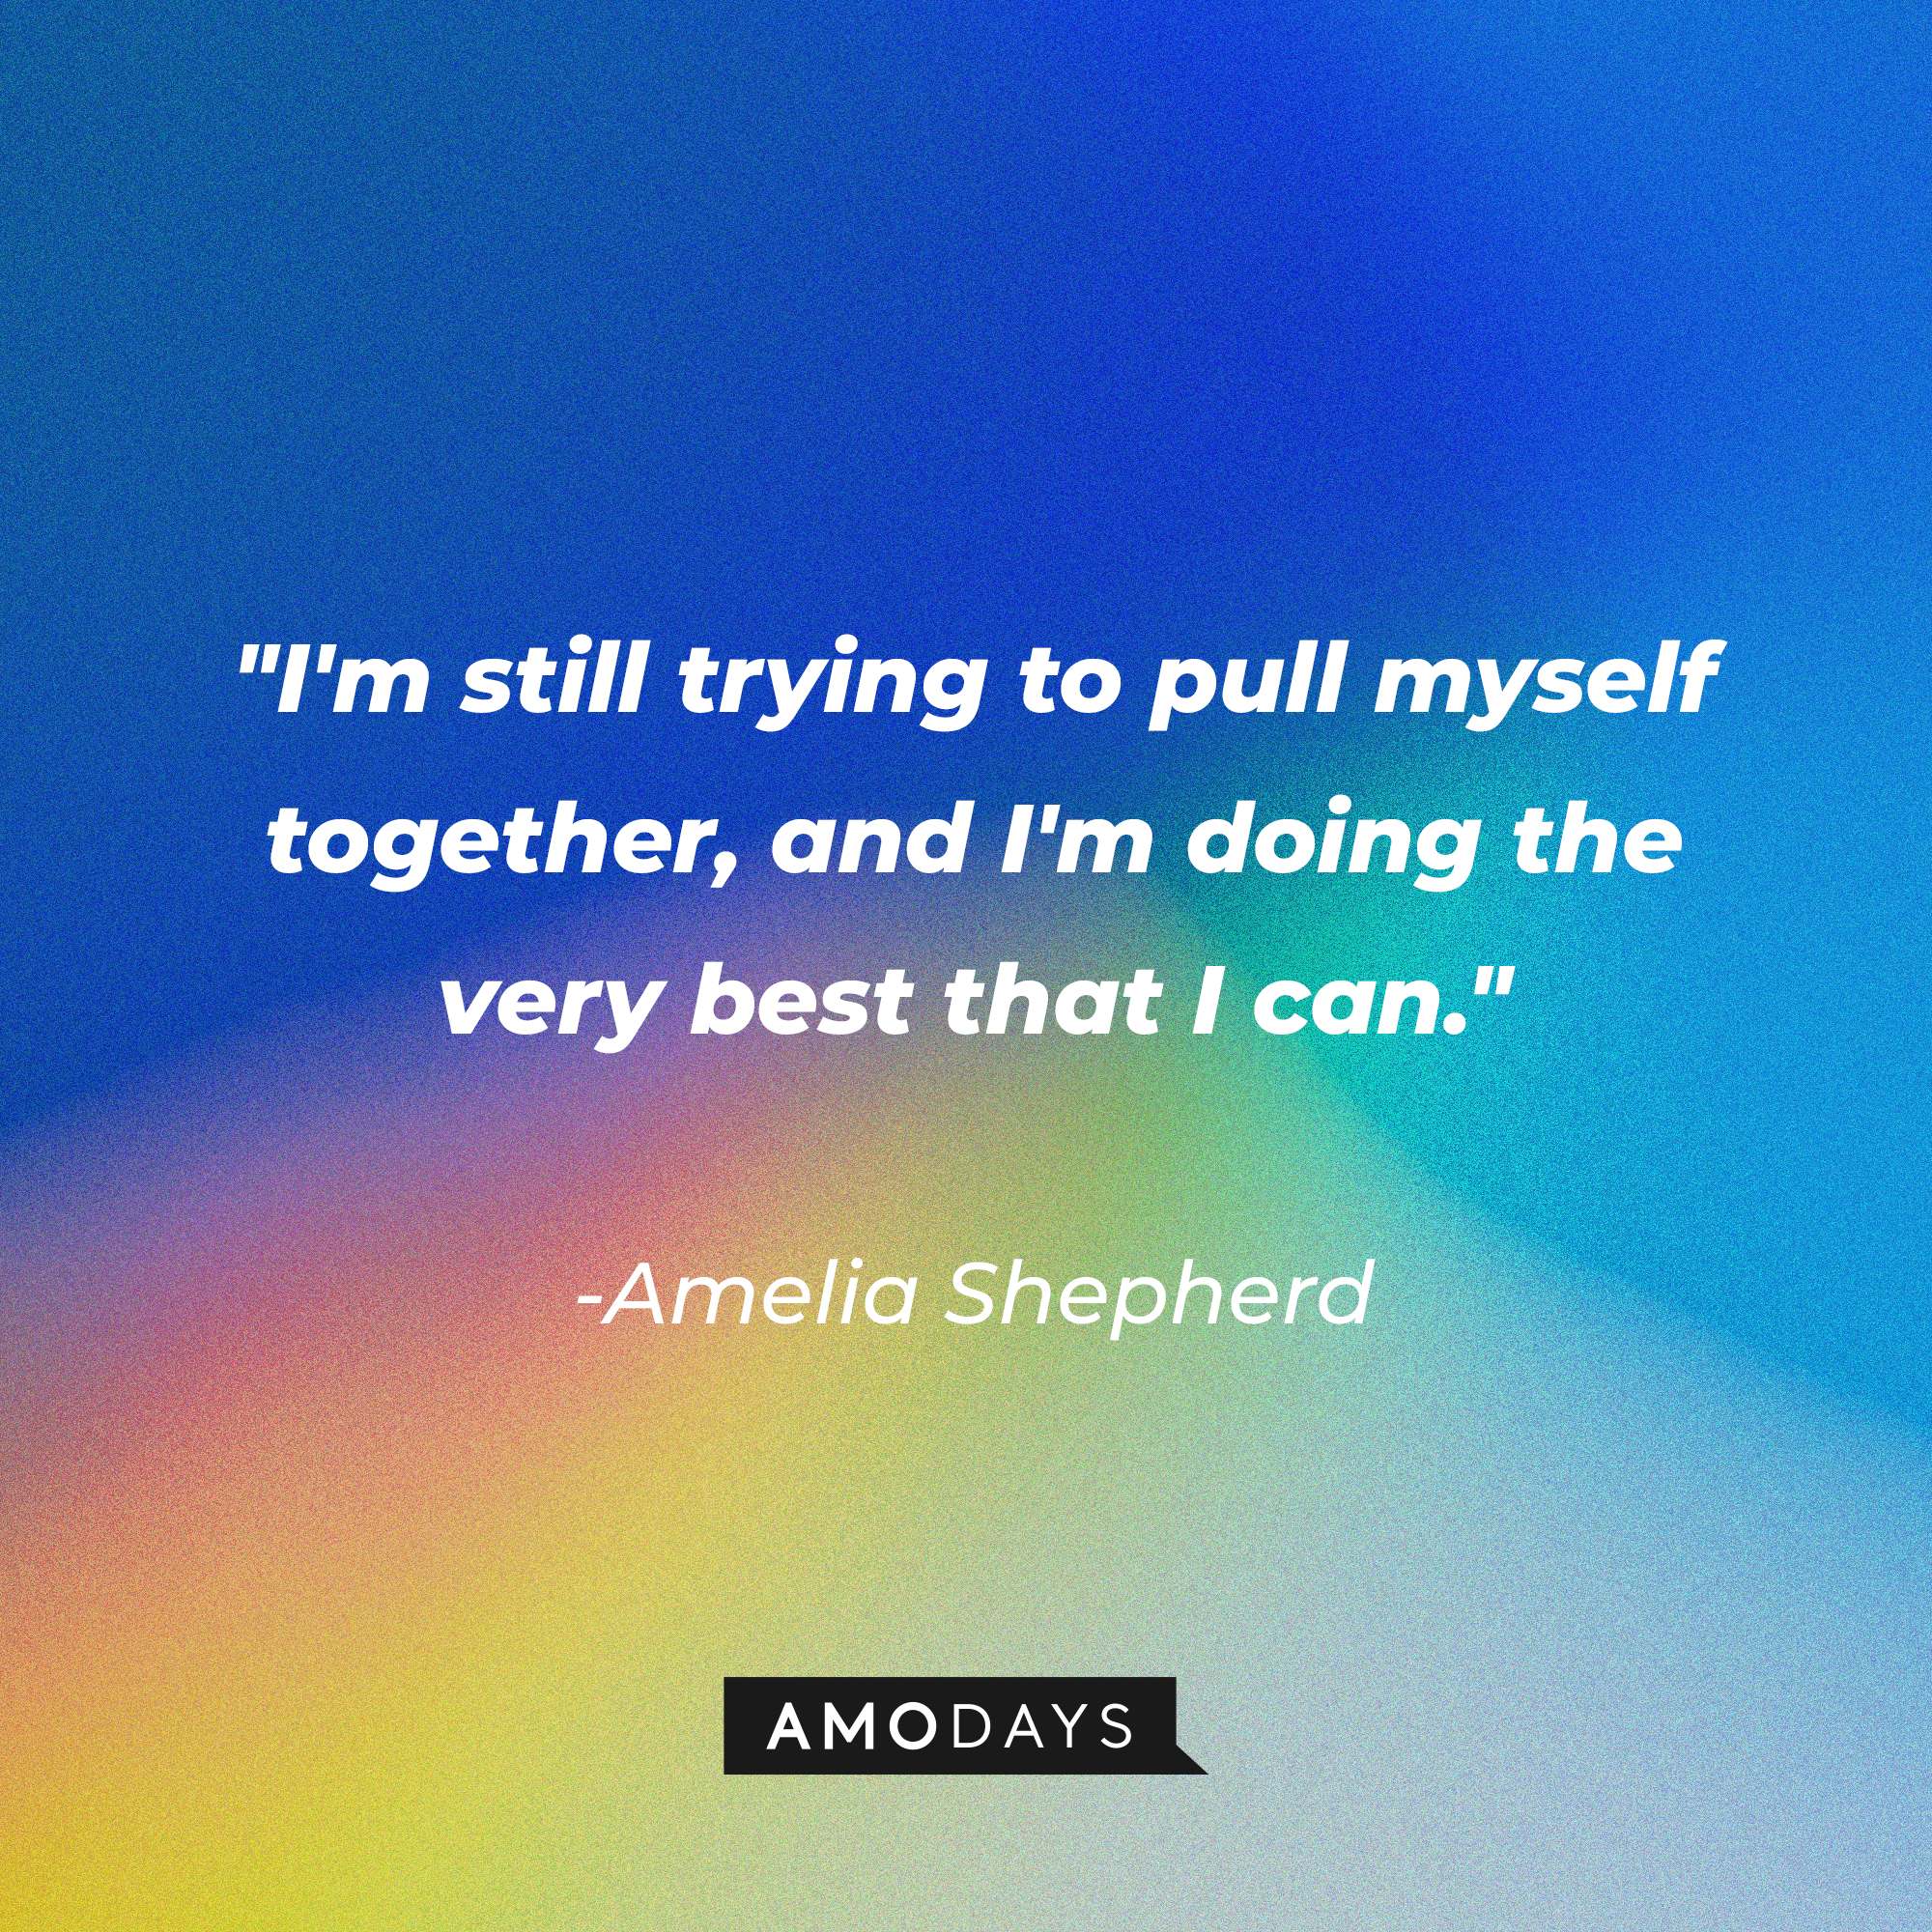 Amelia Shepherd's quote: "I'm still trying to pull myself together, and I'm doing the very best that I can." | Source: AmoDays